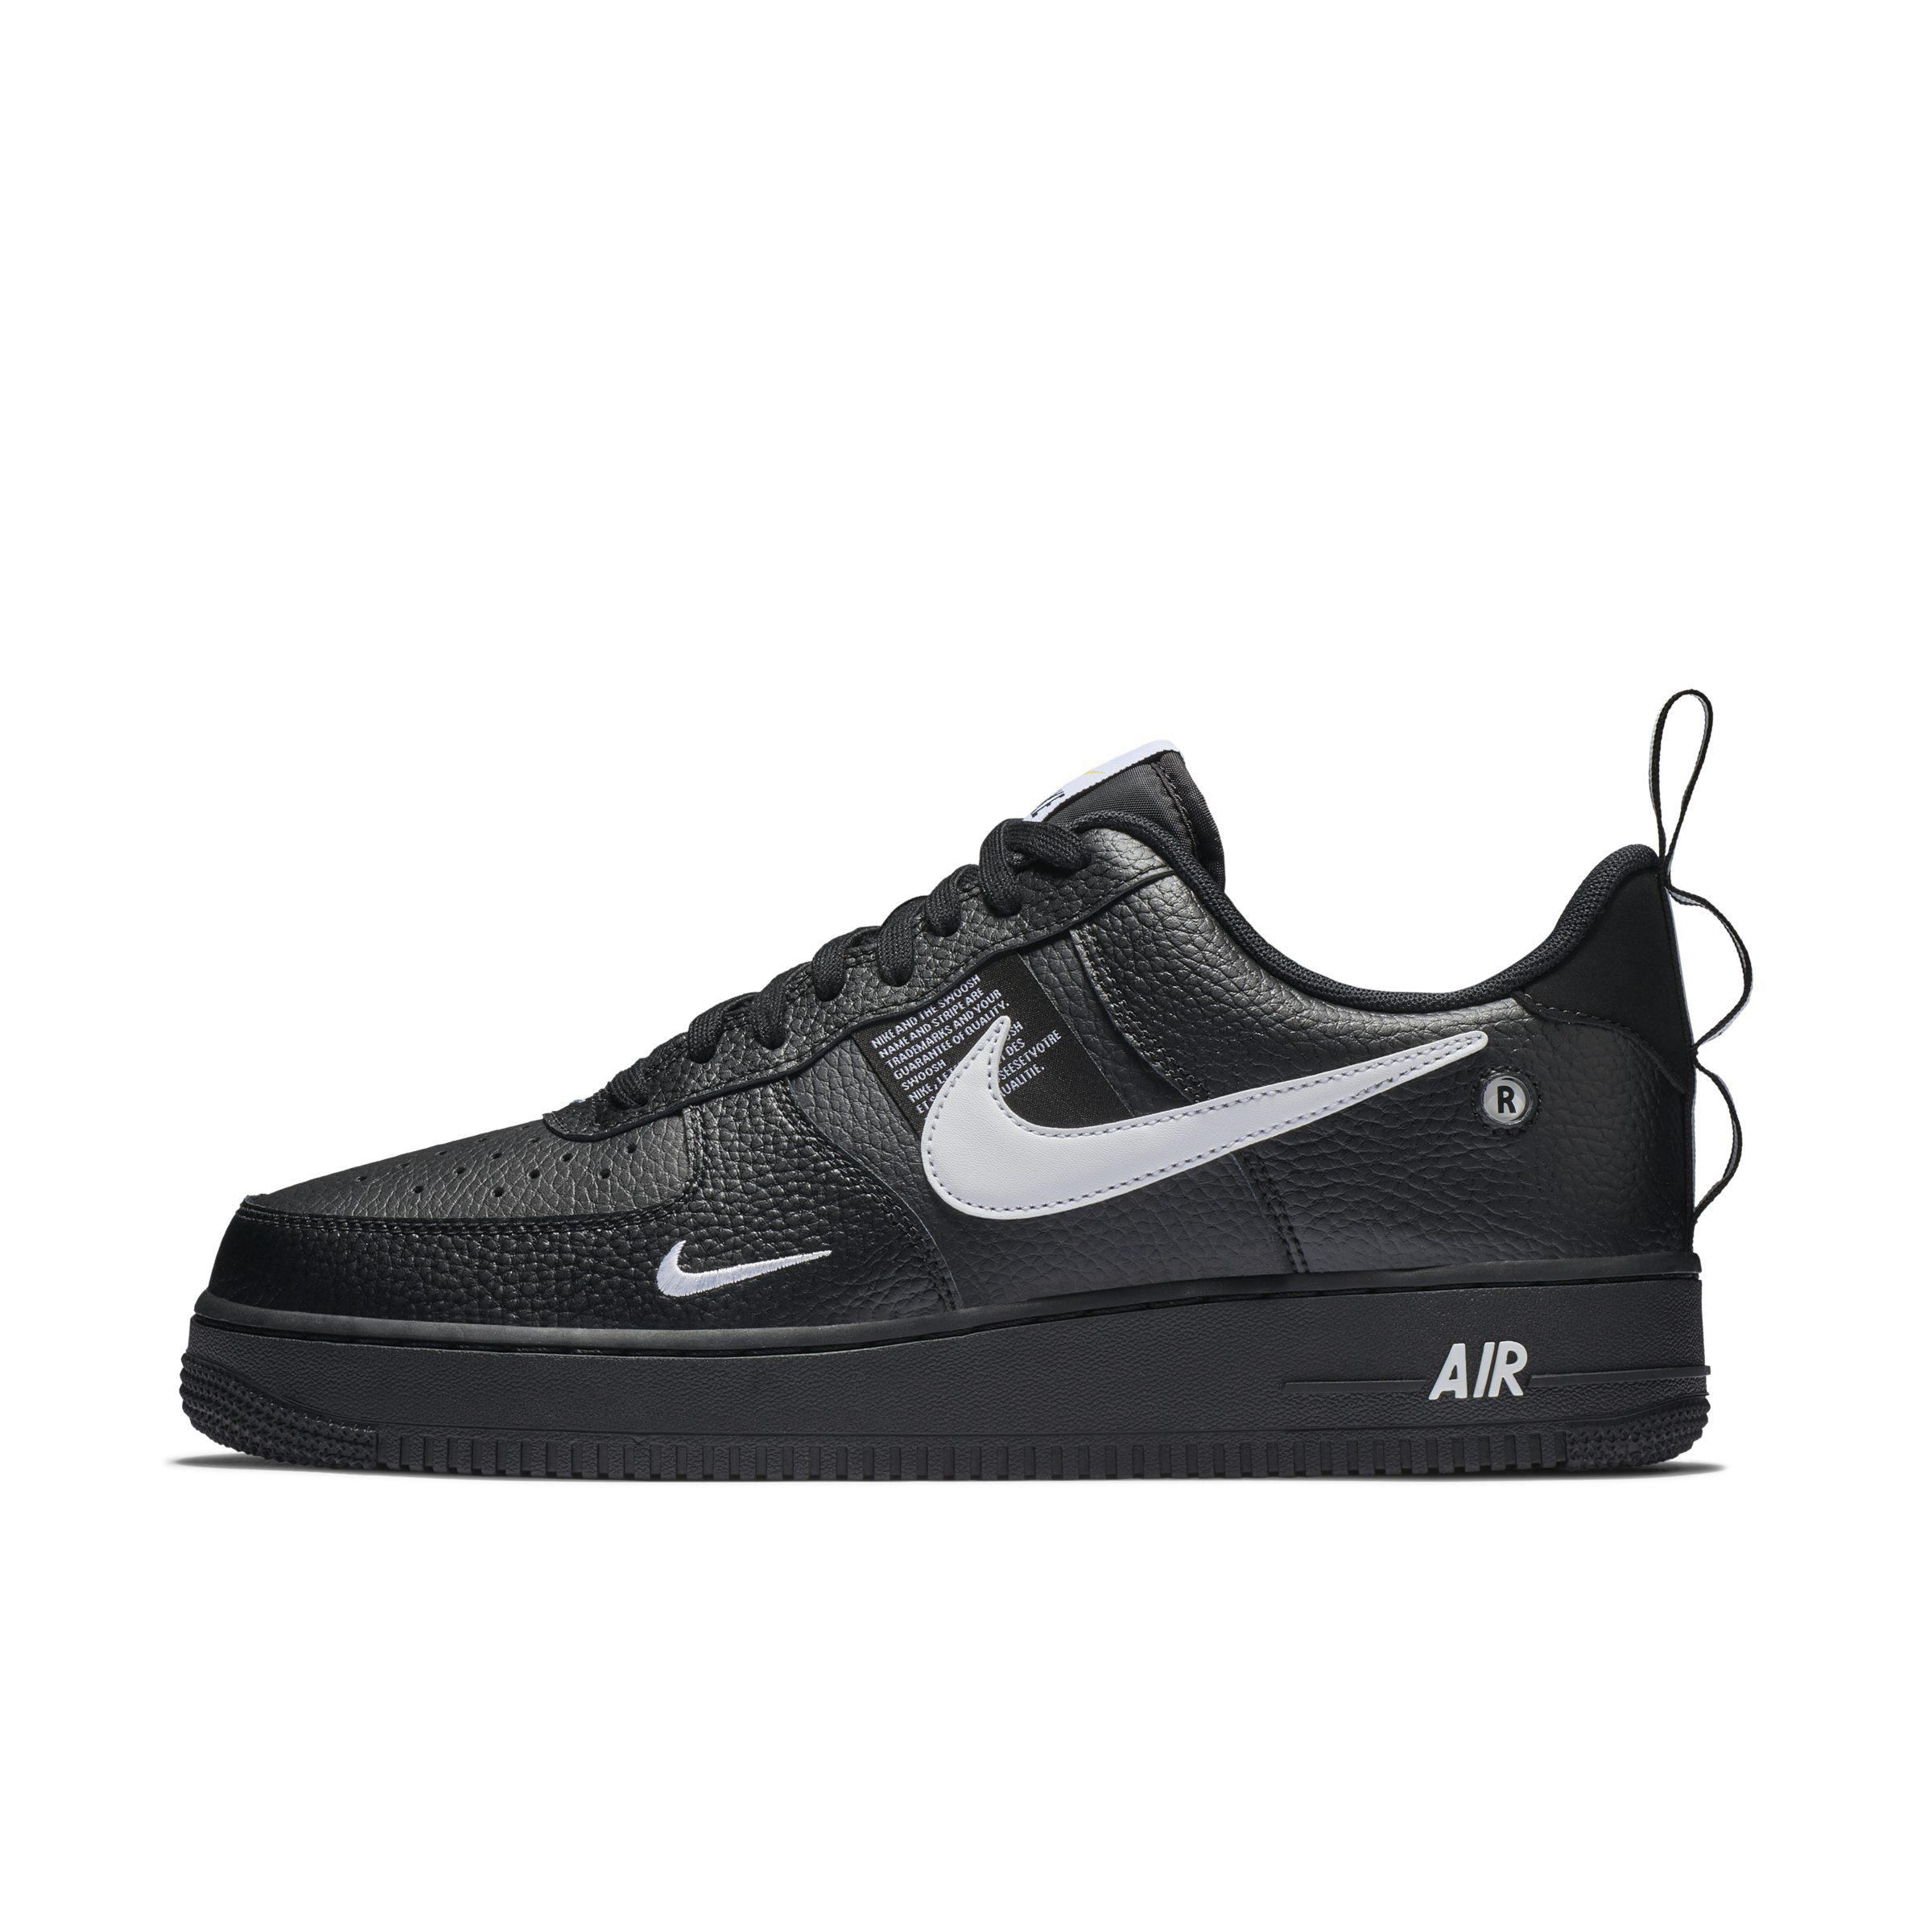 Nike Air Force 1' 07 Lv8 Utility Shoe in Black for Men